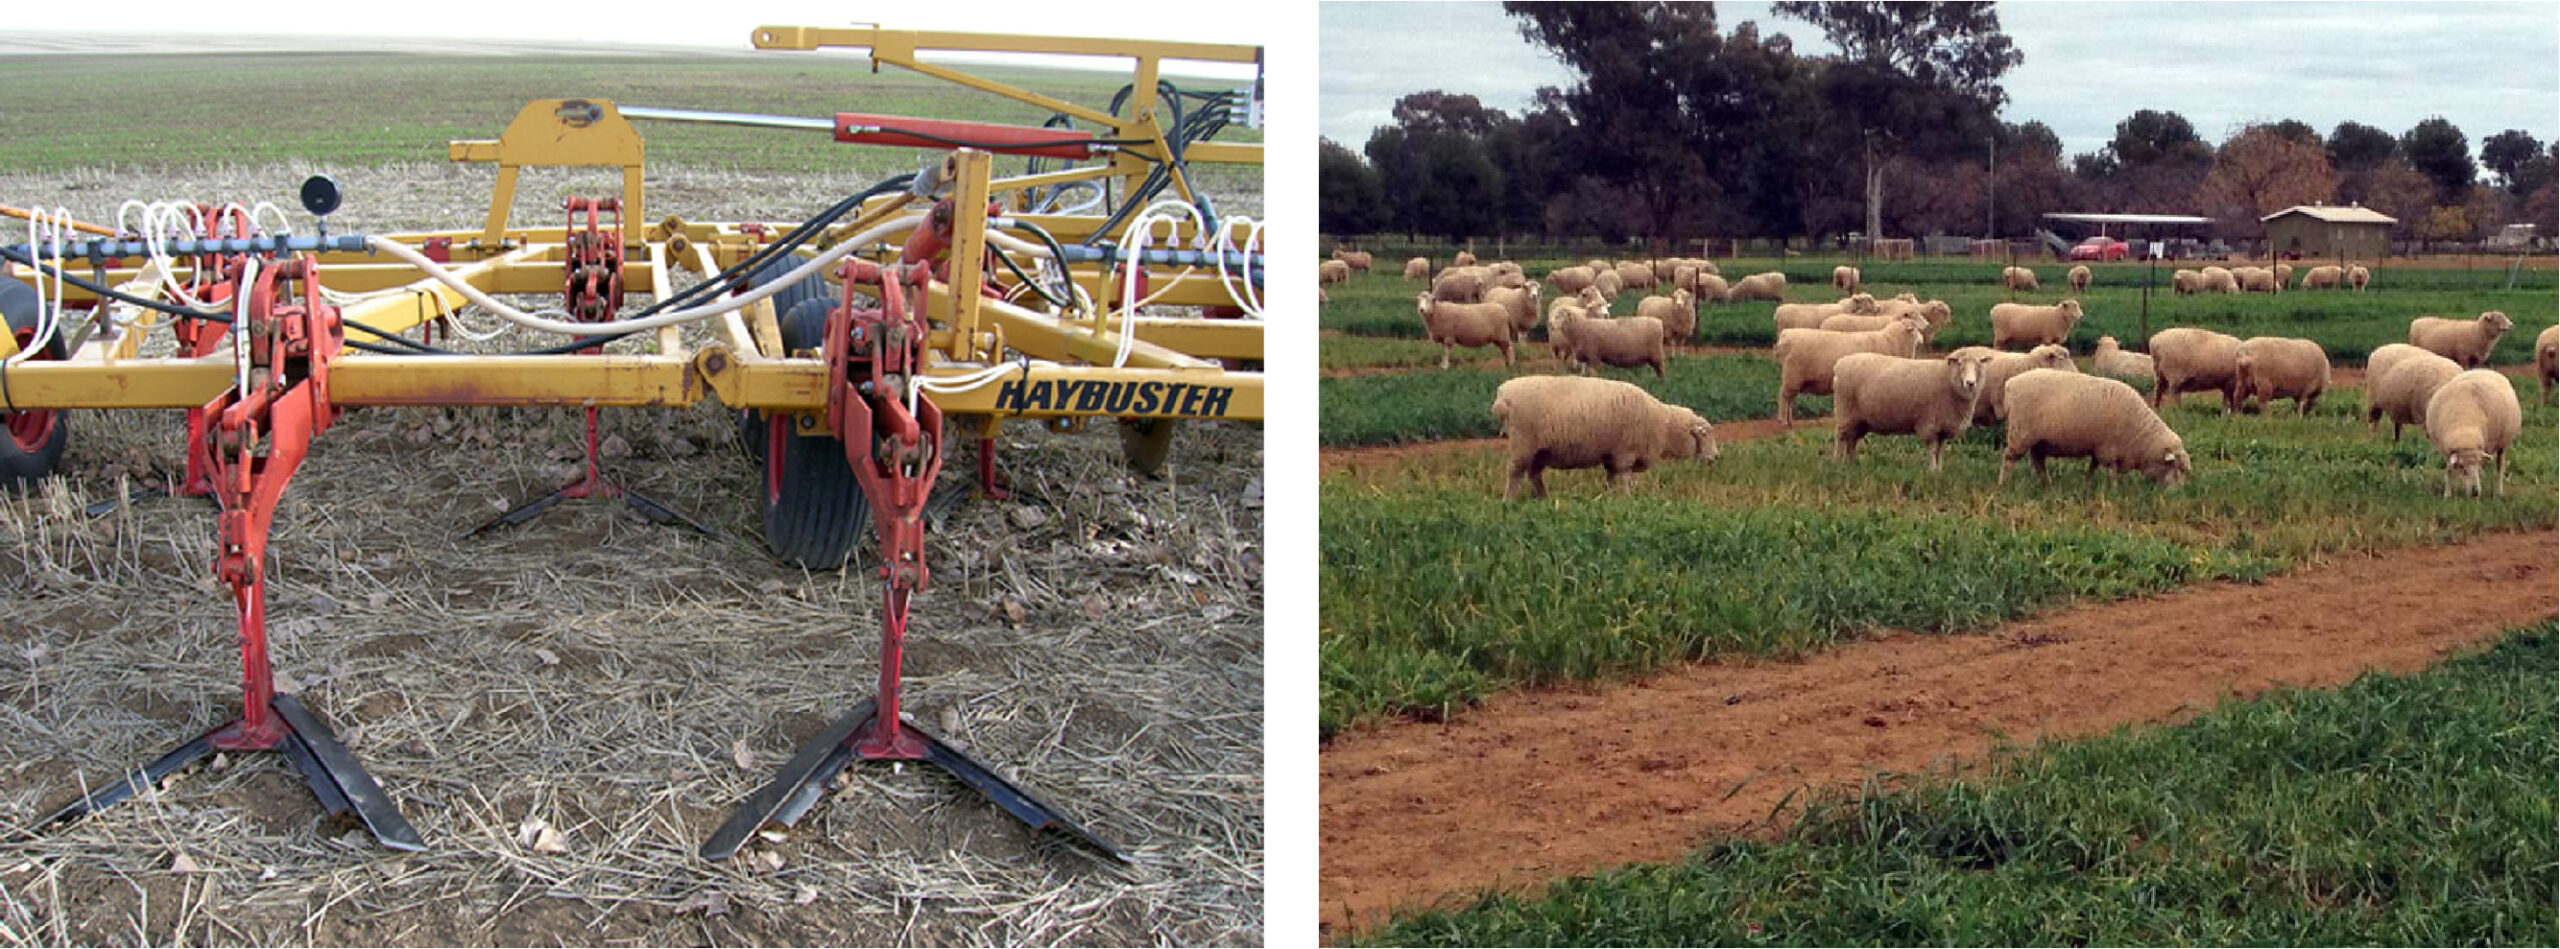 figure 3 - An undercutter tillage implement used for dryland wheat production in Washington State (left); a dual-purpose grazing operation in southwestern Australia (right)